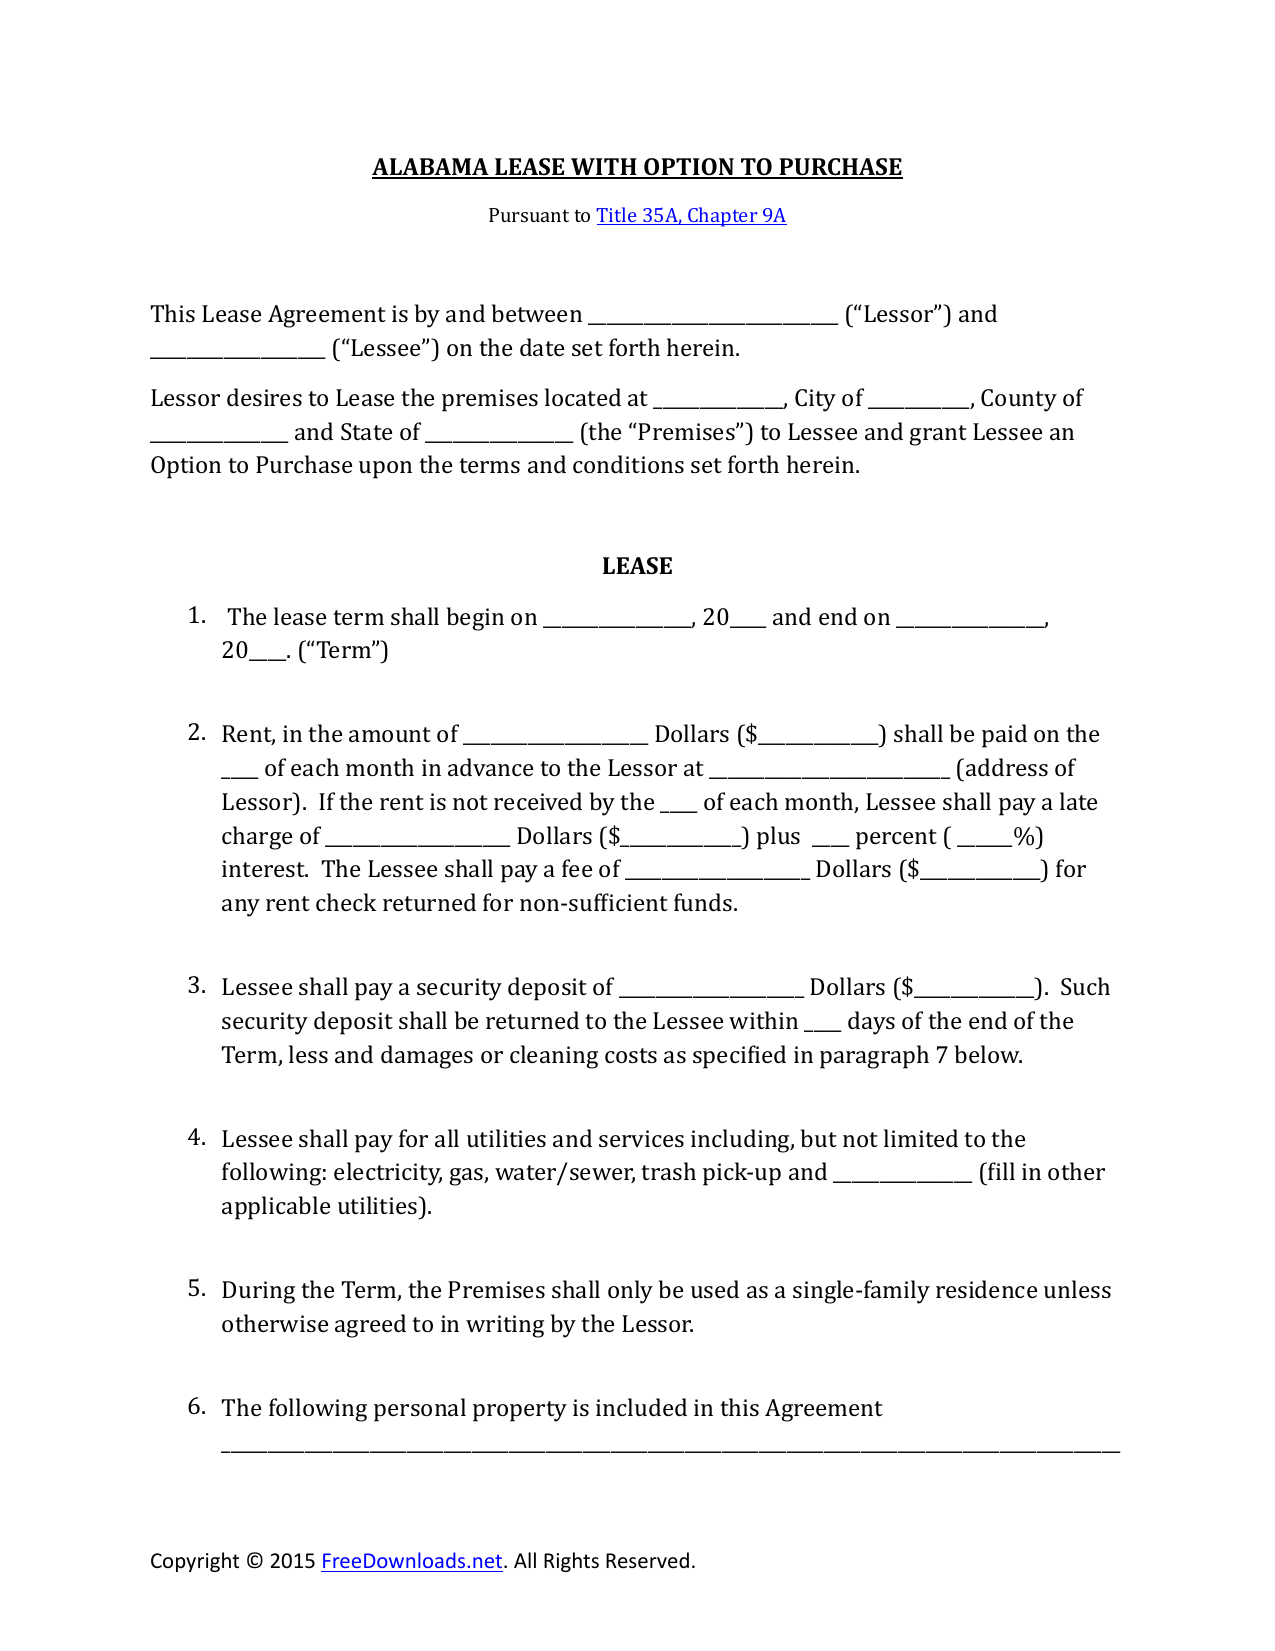 Download Alabama Lease-Purchase (Rent to Own) Agreement ...